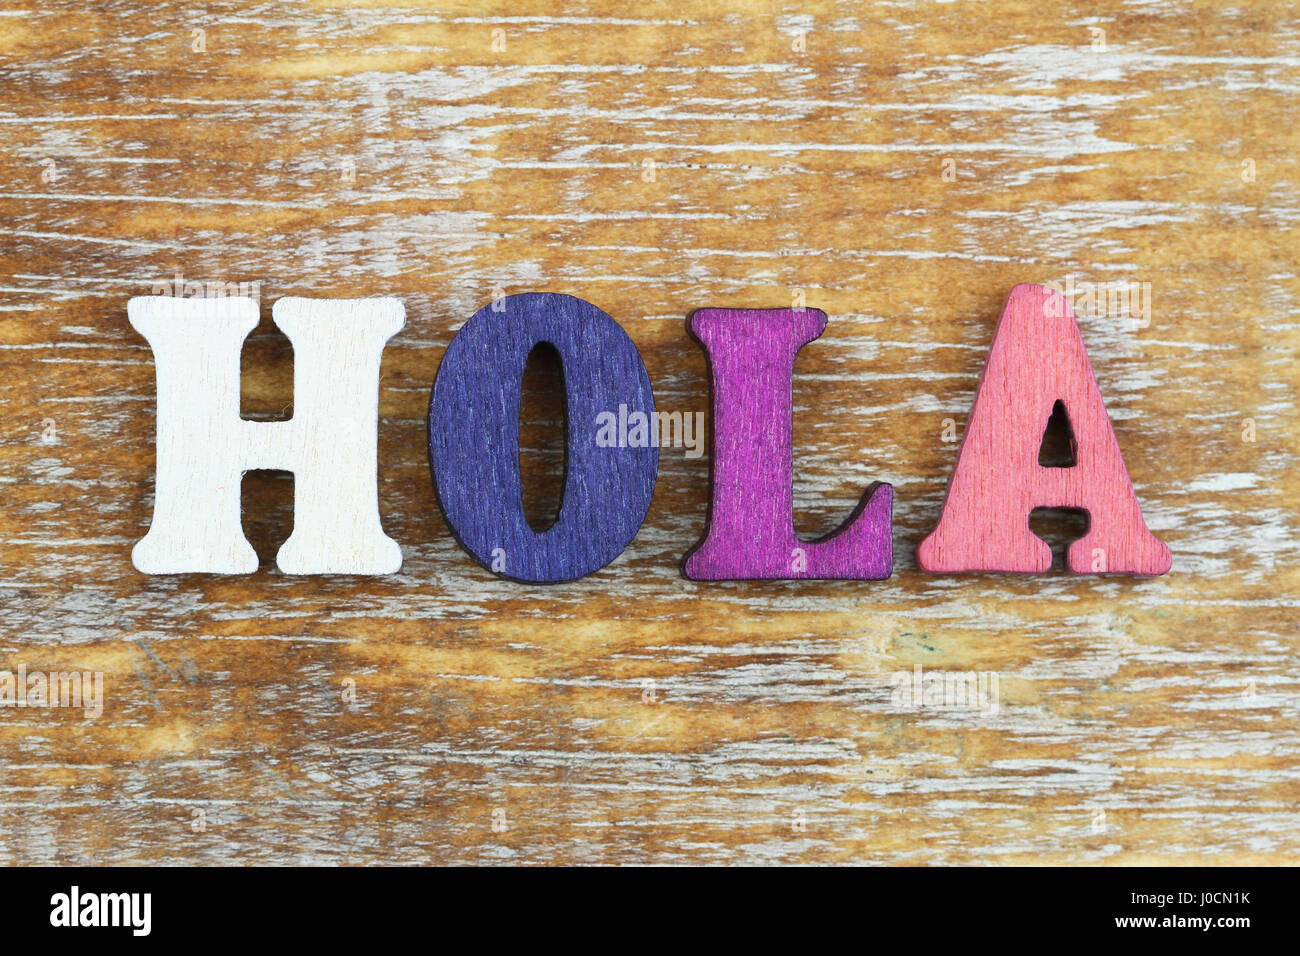 Word hola (hello in Spanish) written with colorful letters on wooden surface Stock Photo